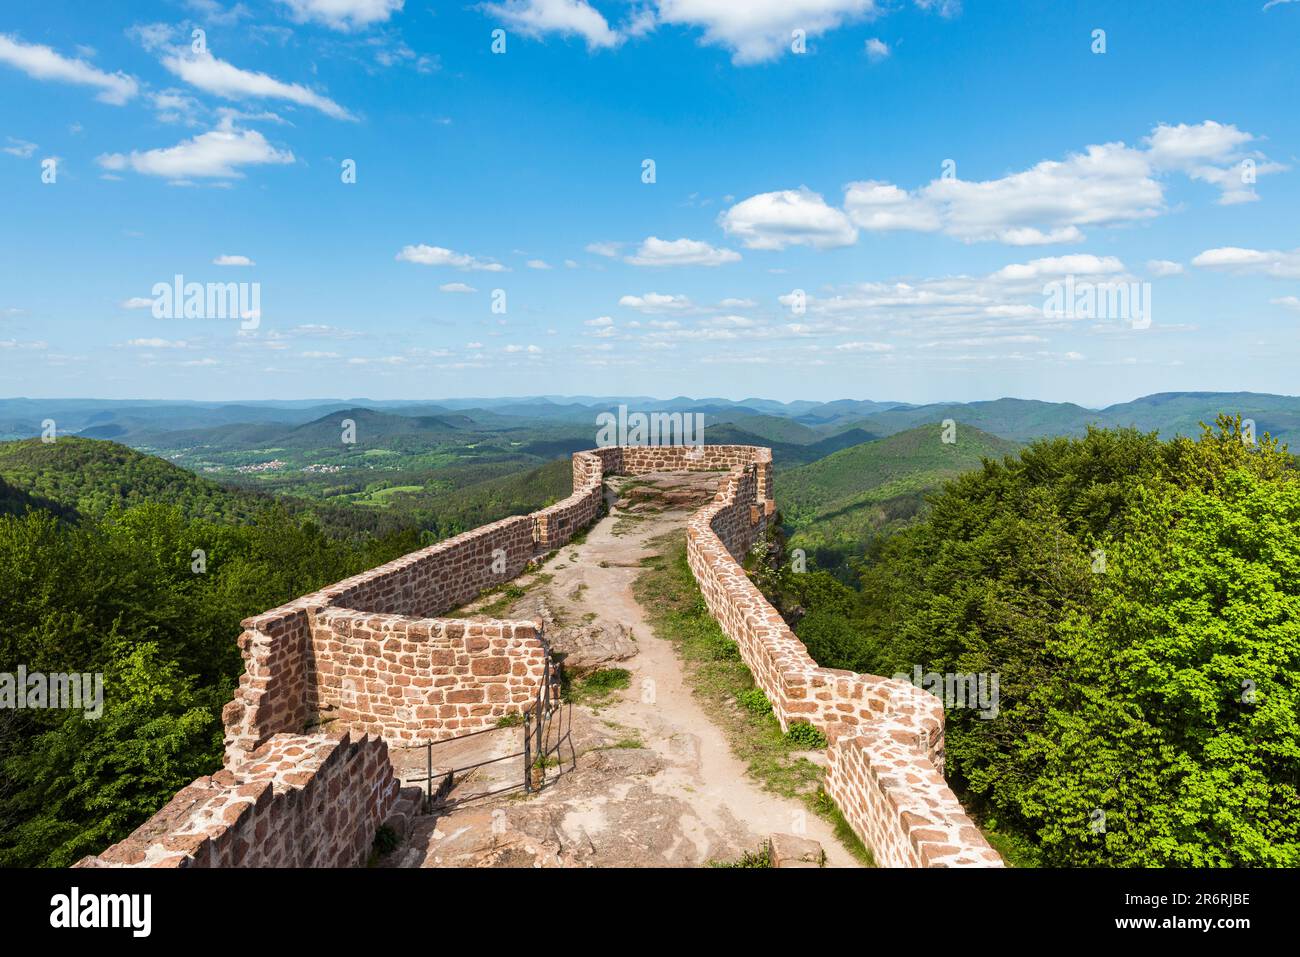 View over Wegelnburg castle ruins and the sun shining on the Palatinate Mountains panorama in spring, Rhineland-Palatinate, Germany Stock Photo